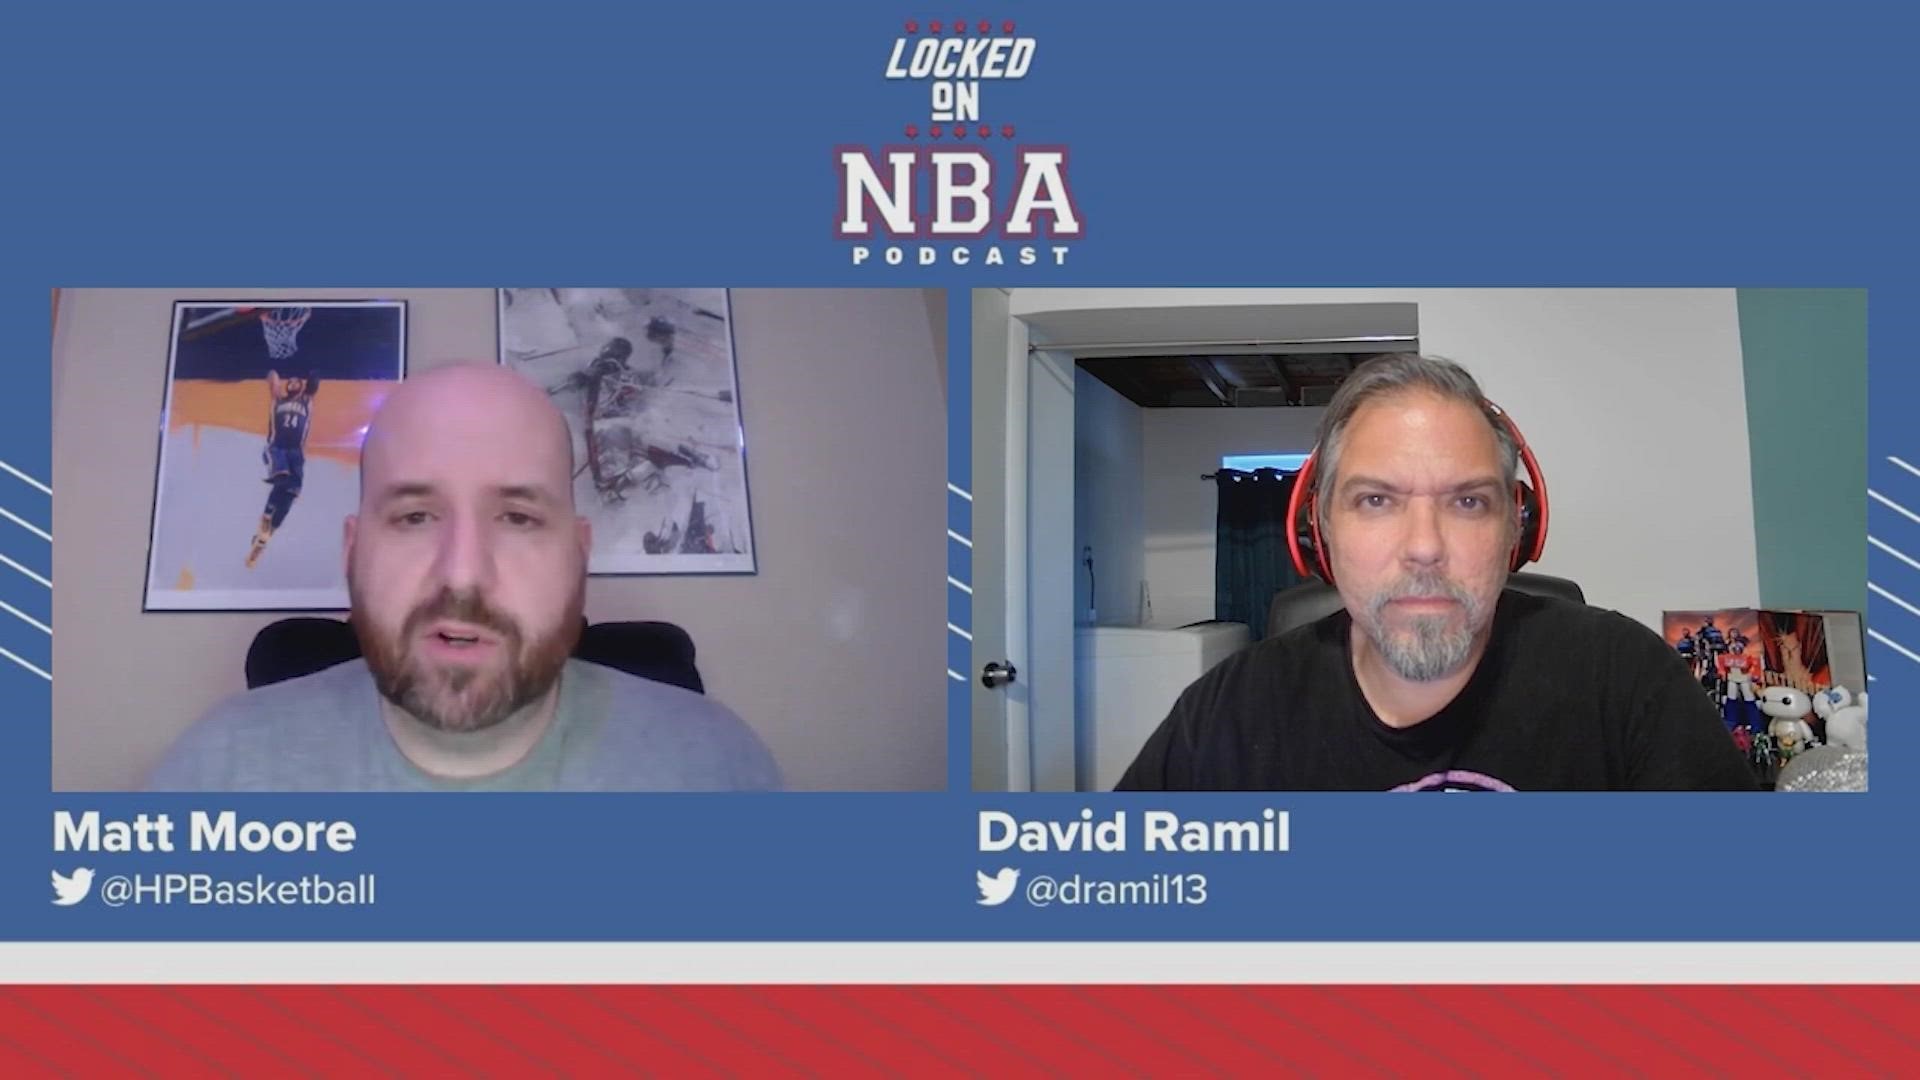 Locked On NBA podcast hosts Matt Moore and David Ramil preview Tuesday's play-in tournament games in the NBA and analyze upcoming playoff scenarios.